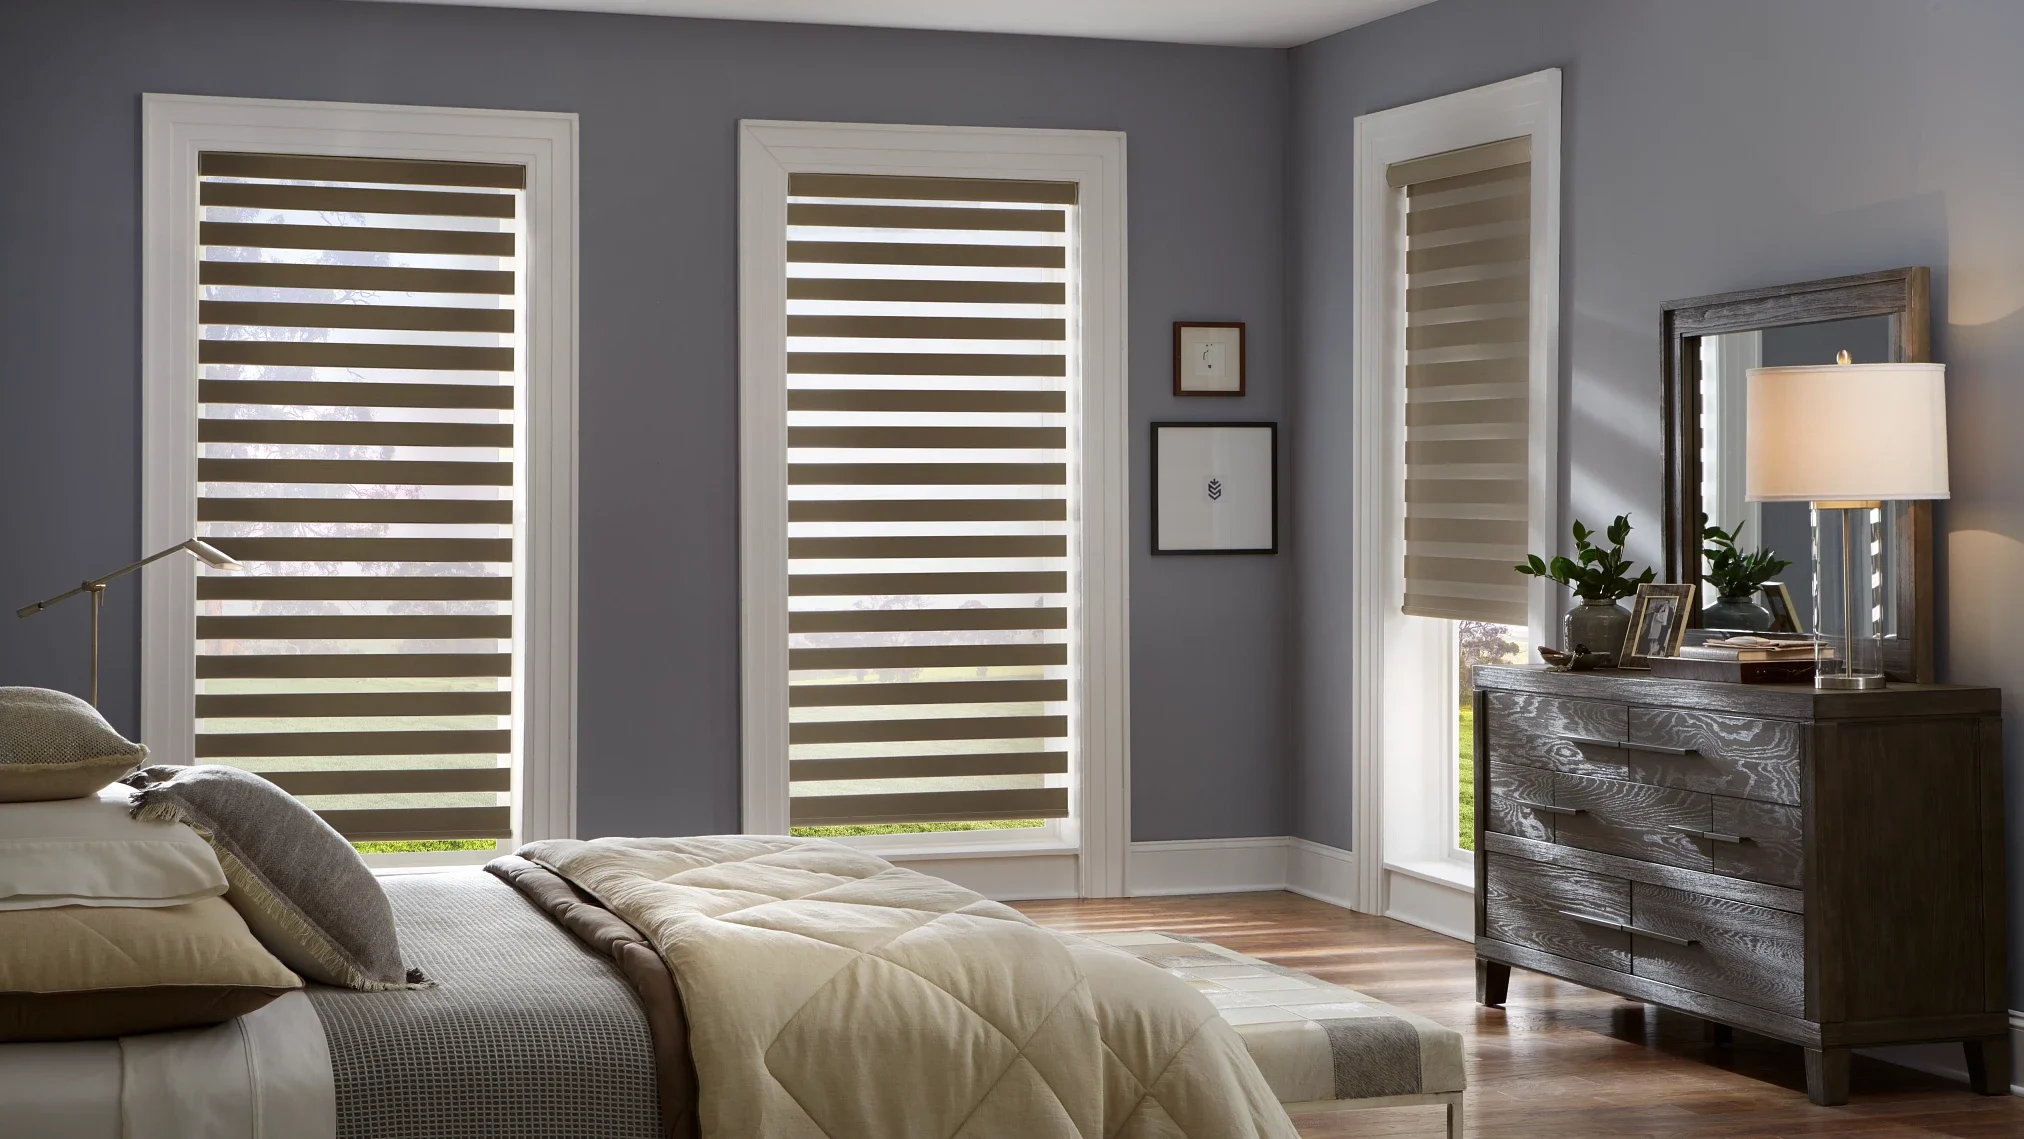 Three motorized banded shaded on tall windows in a bedroom.